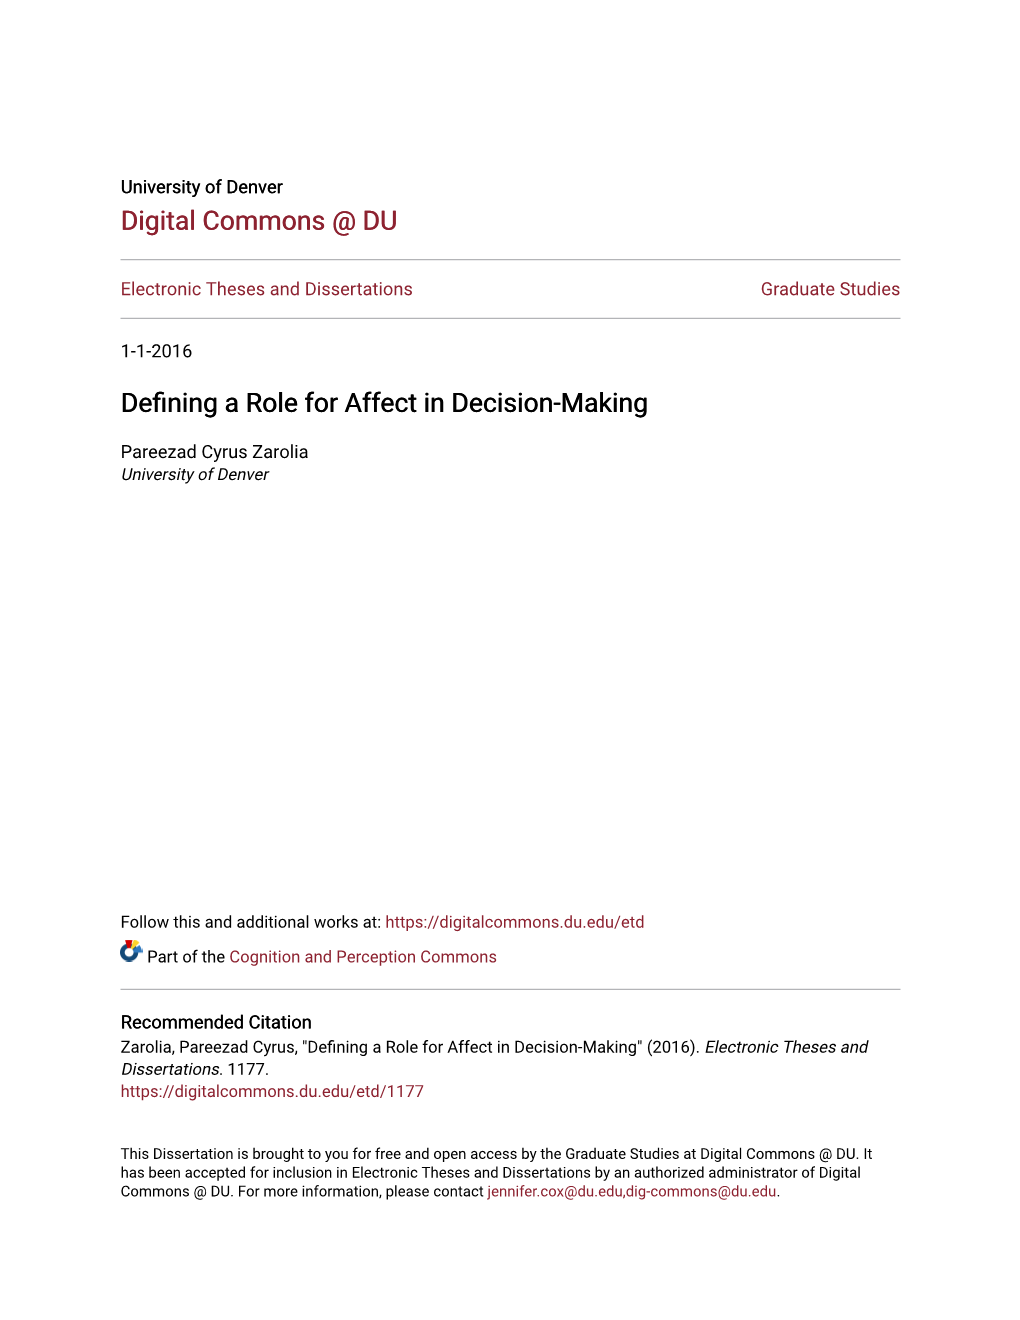 Defining a Role for Affect in Decision-Making